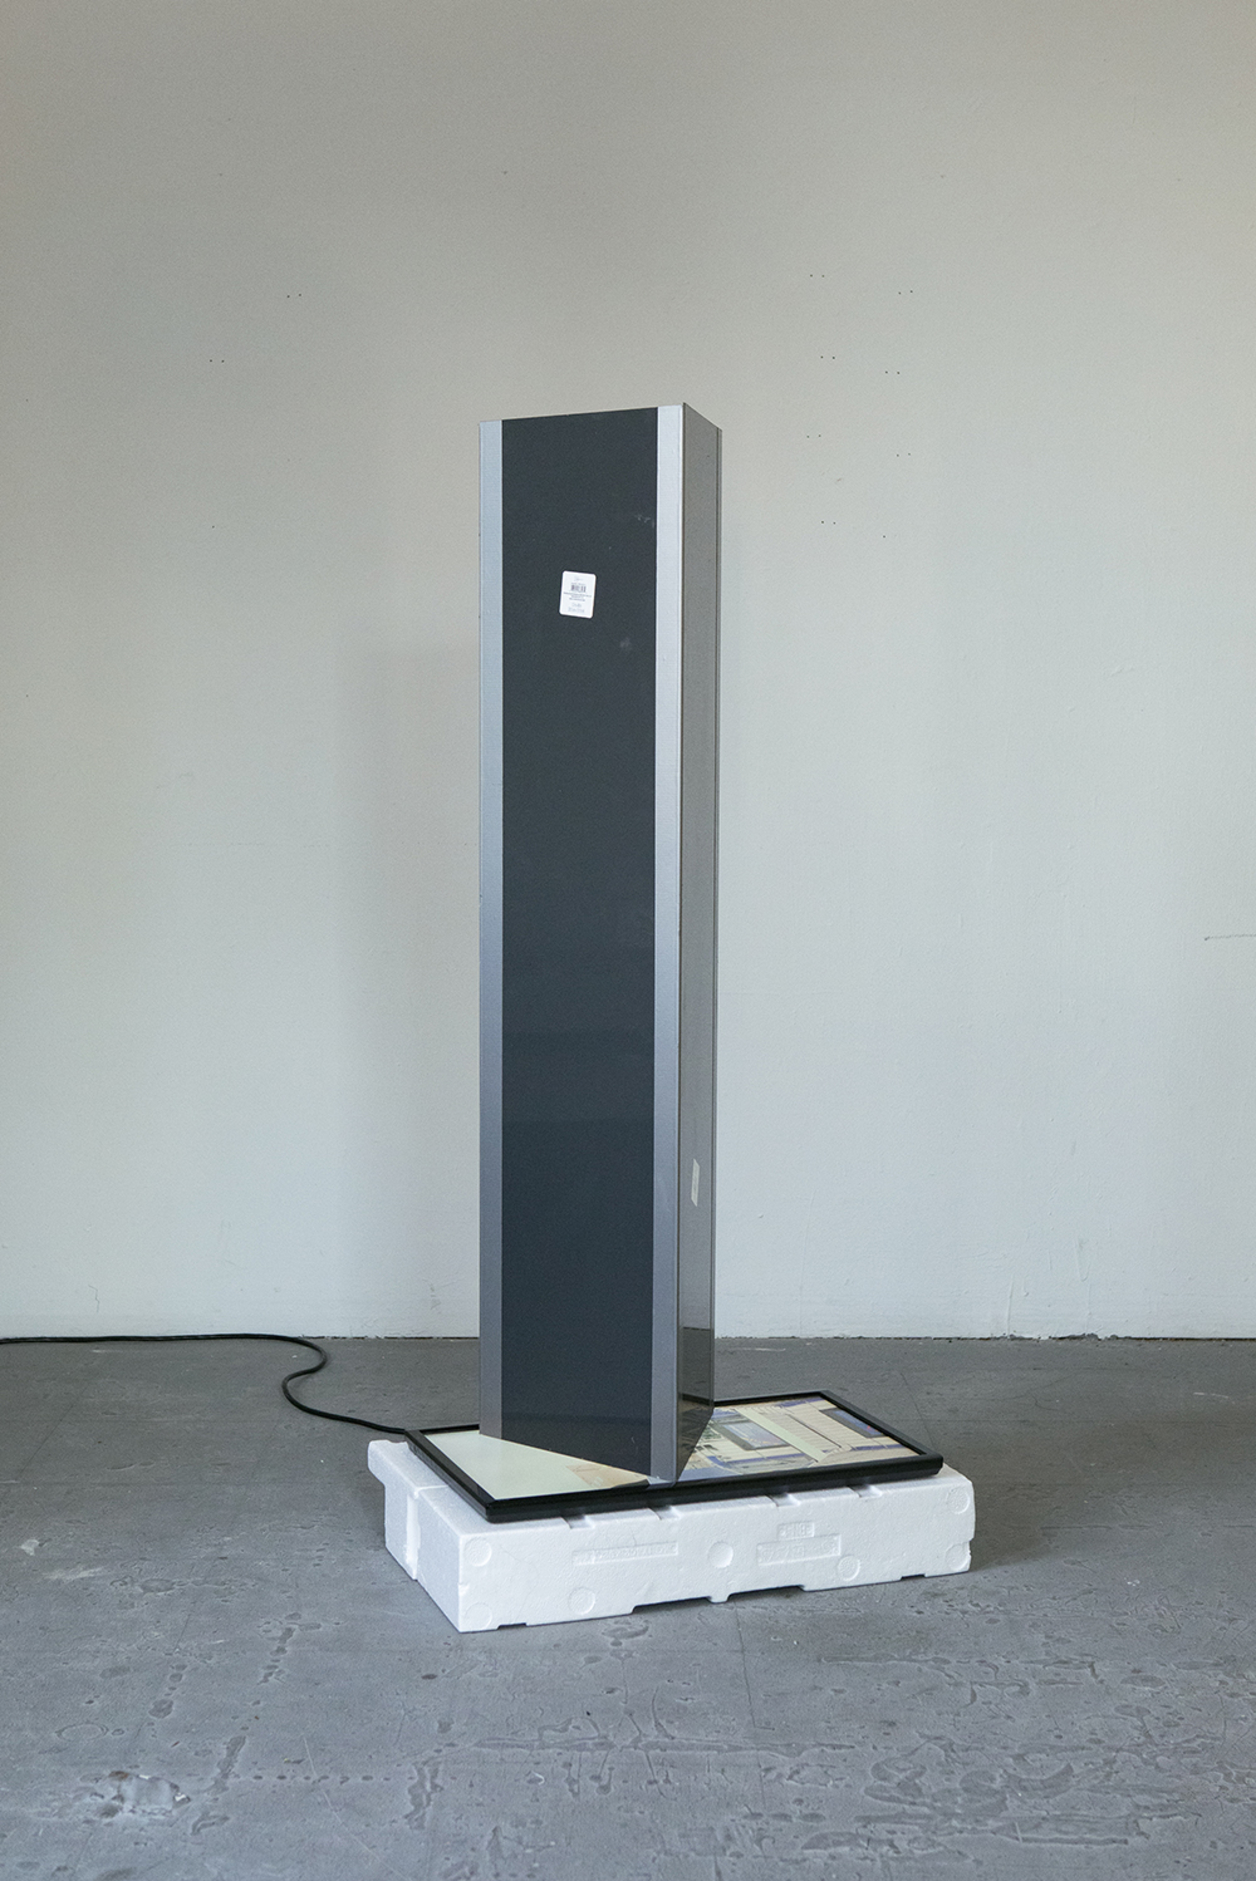 Tall thin sculpture with monitor built in